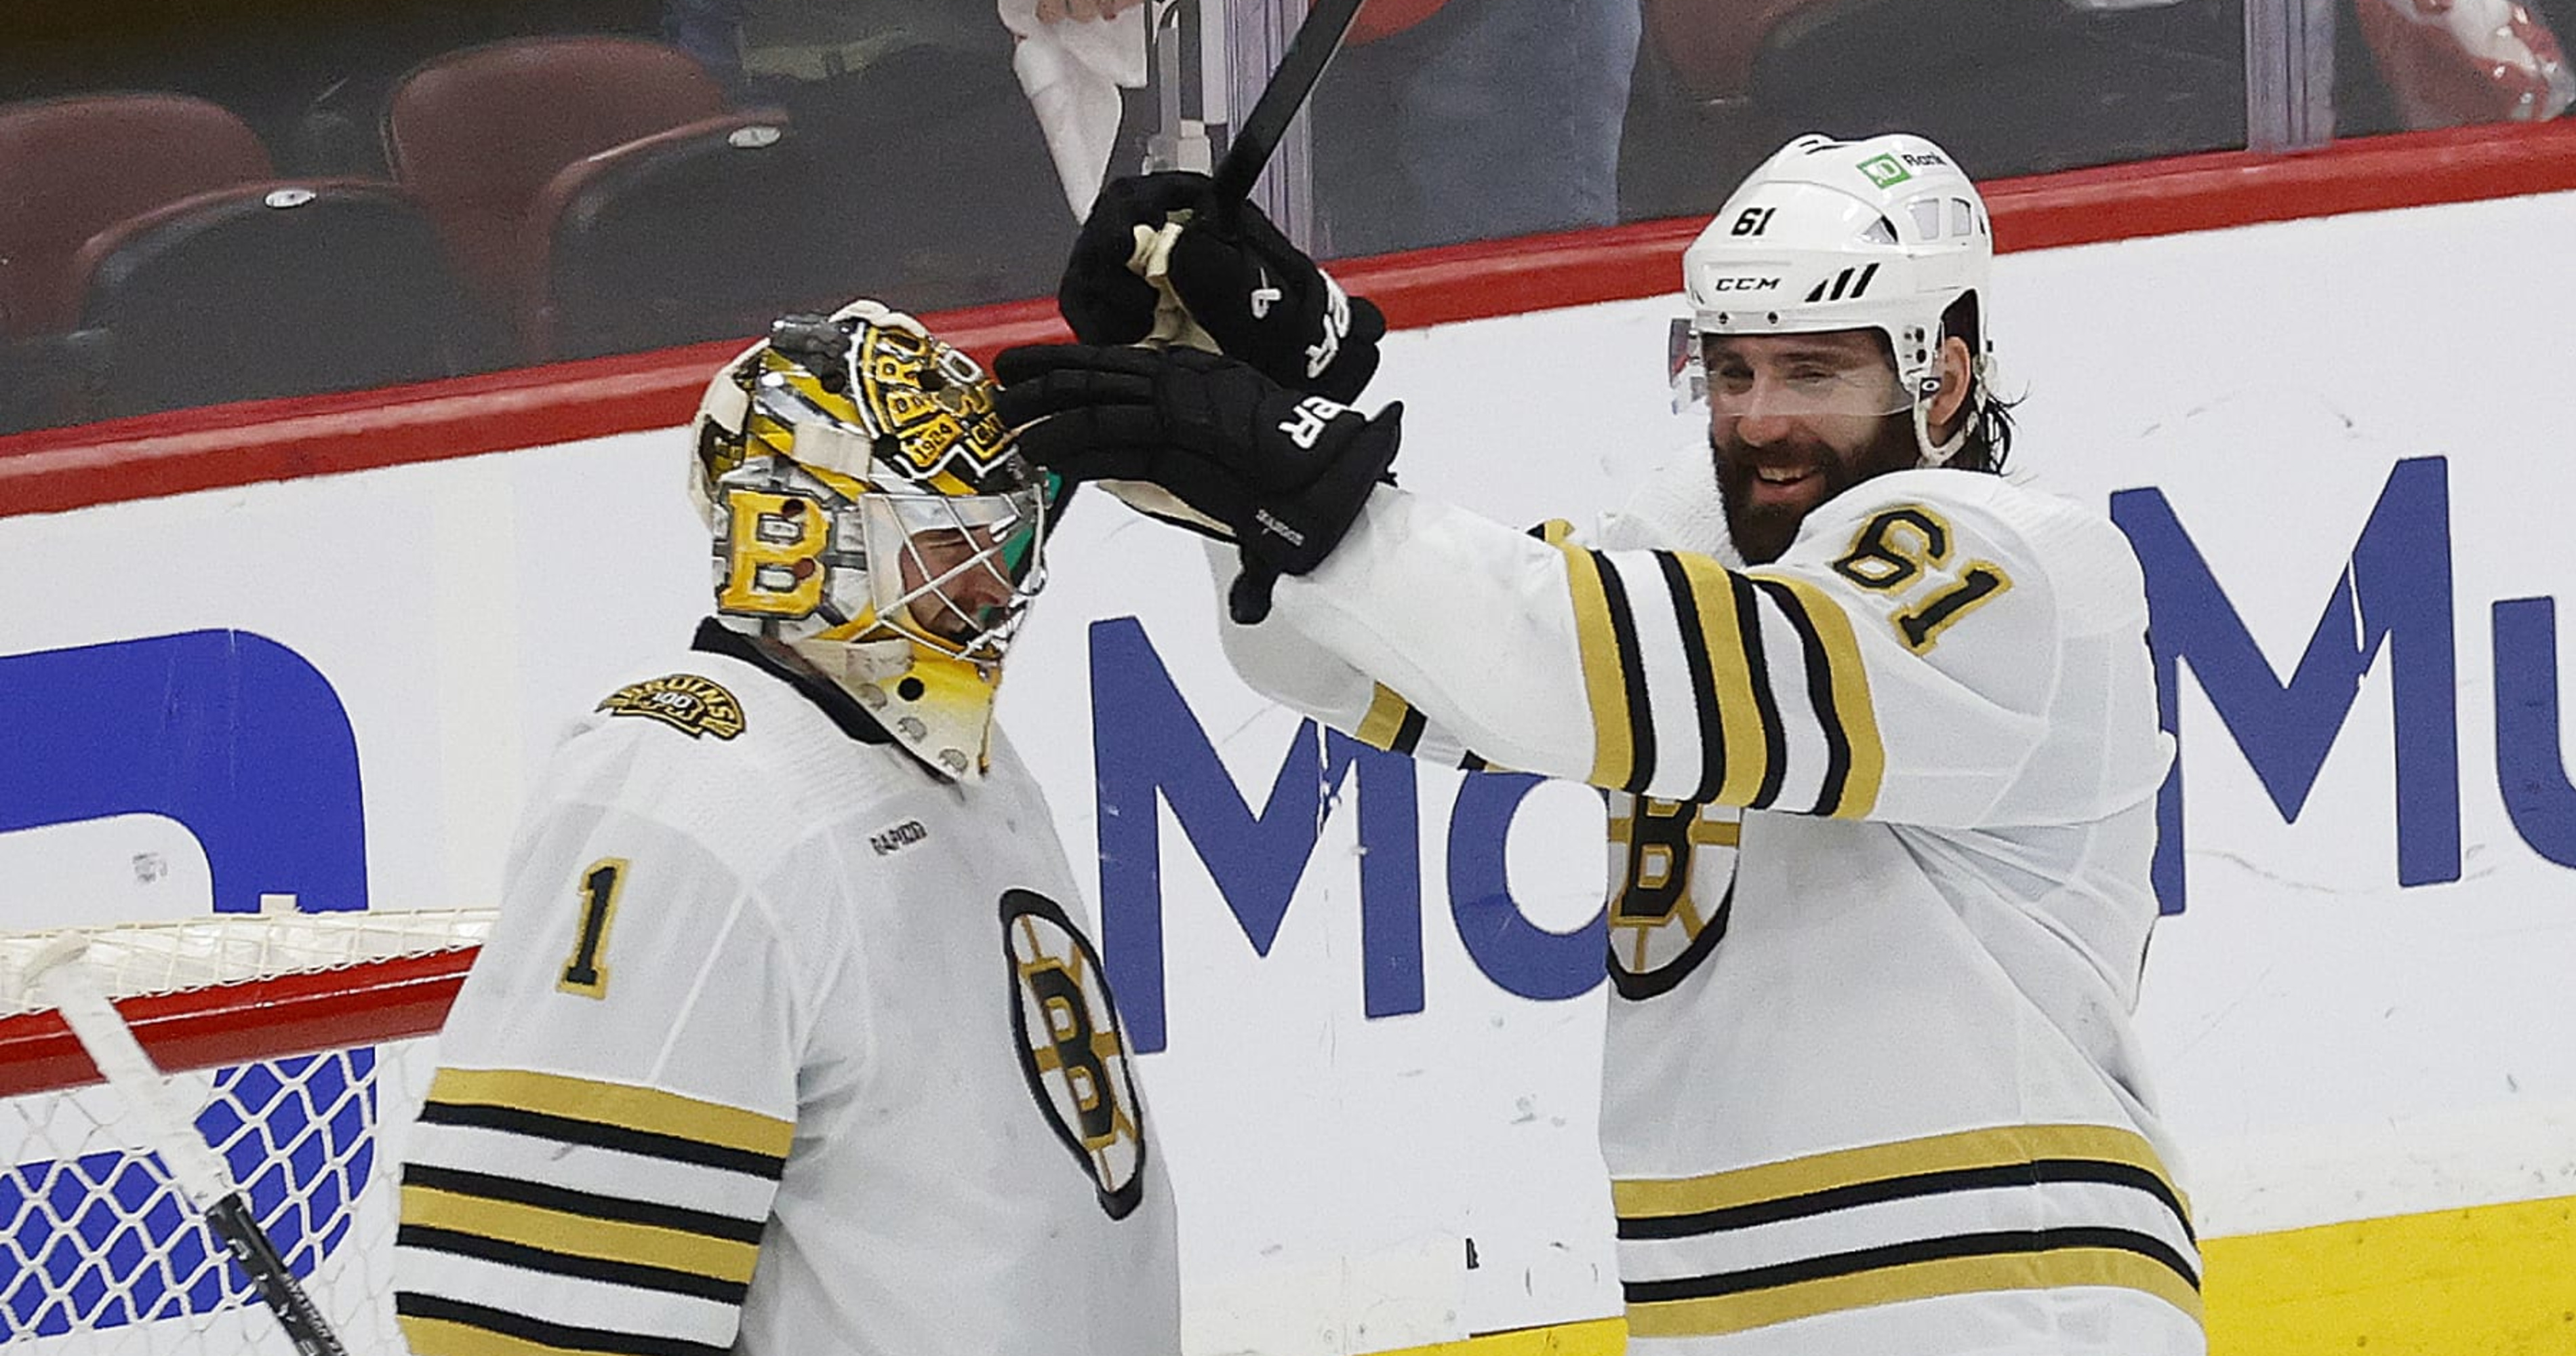 Bruins Applauded by NHL Fans After Keeping Season Alive with Game 5 Win vs. Panthers